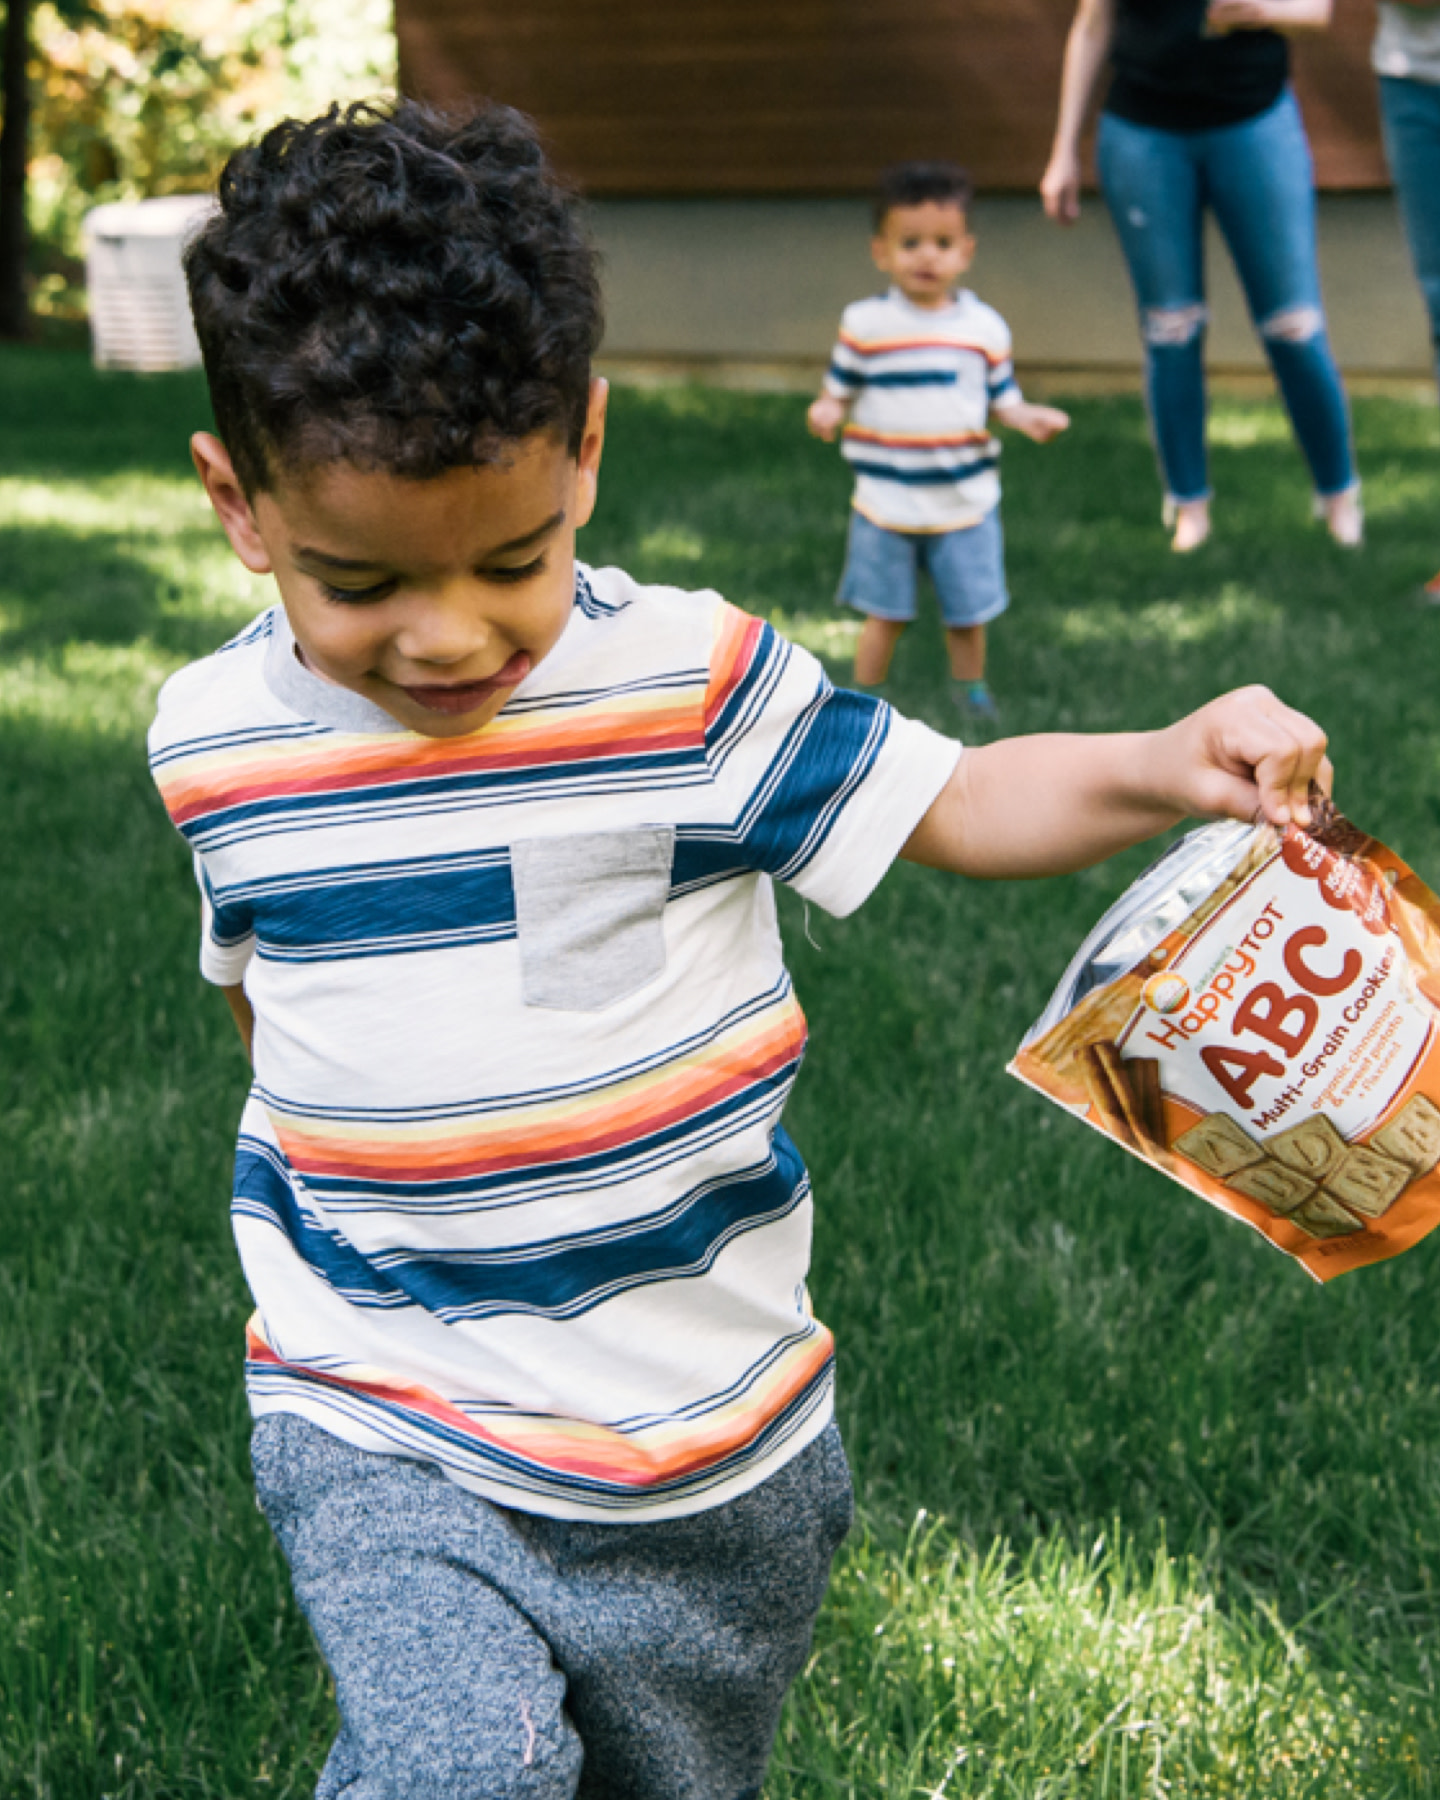 Boy running outside while holding bag of ABC cookies.